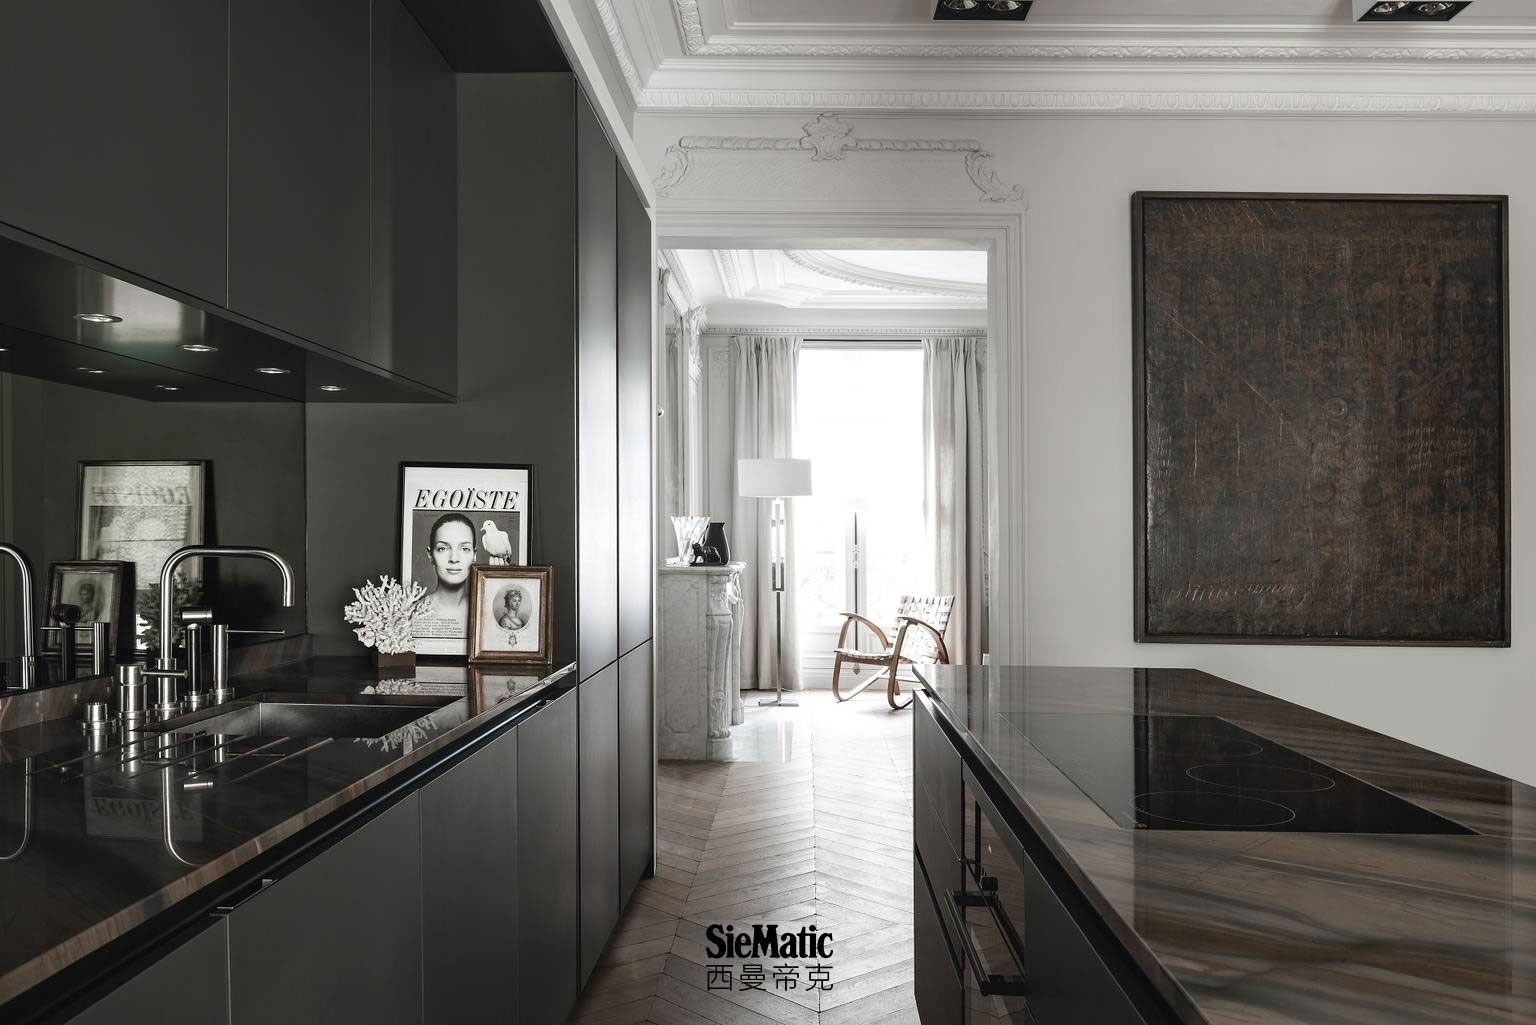 SieMatic Pure S2 kitchen cabinets and recessed handle channels in graphite grey matte lacquer with meticulous AntiPrint coating